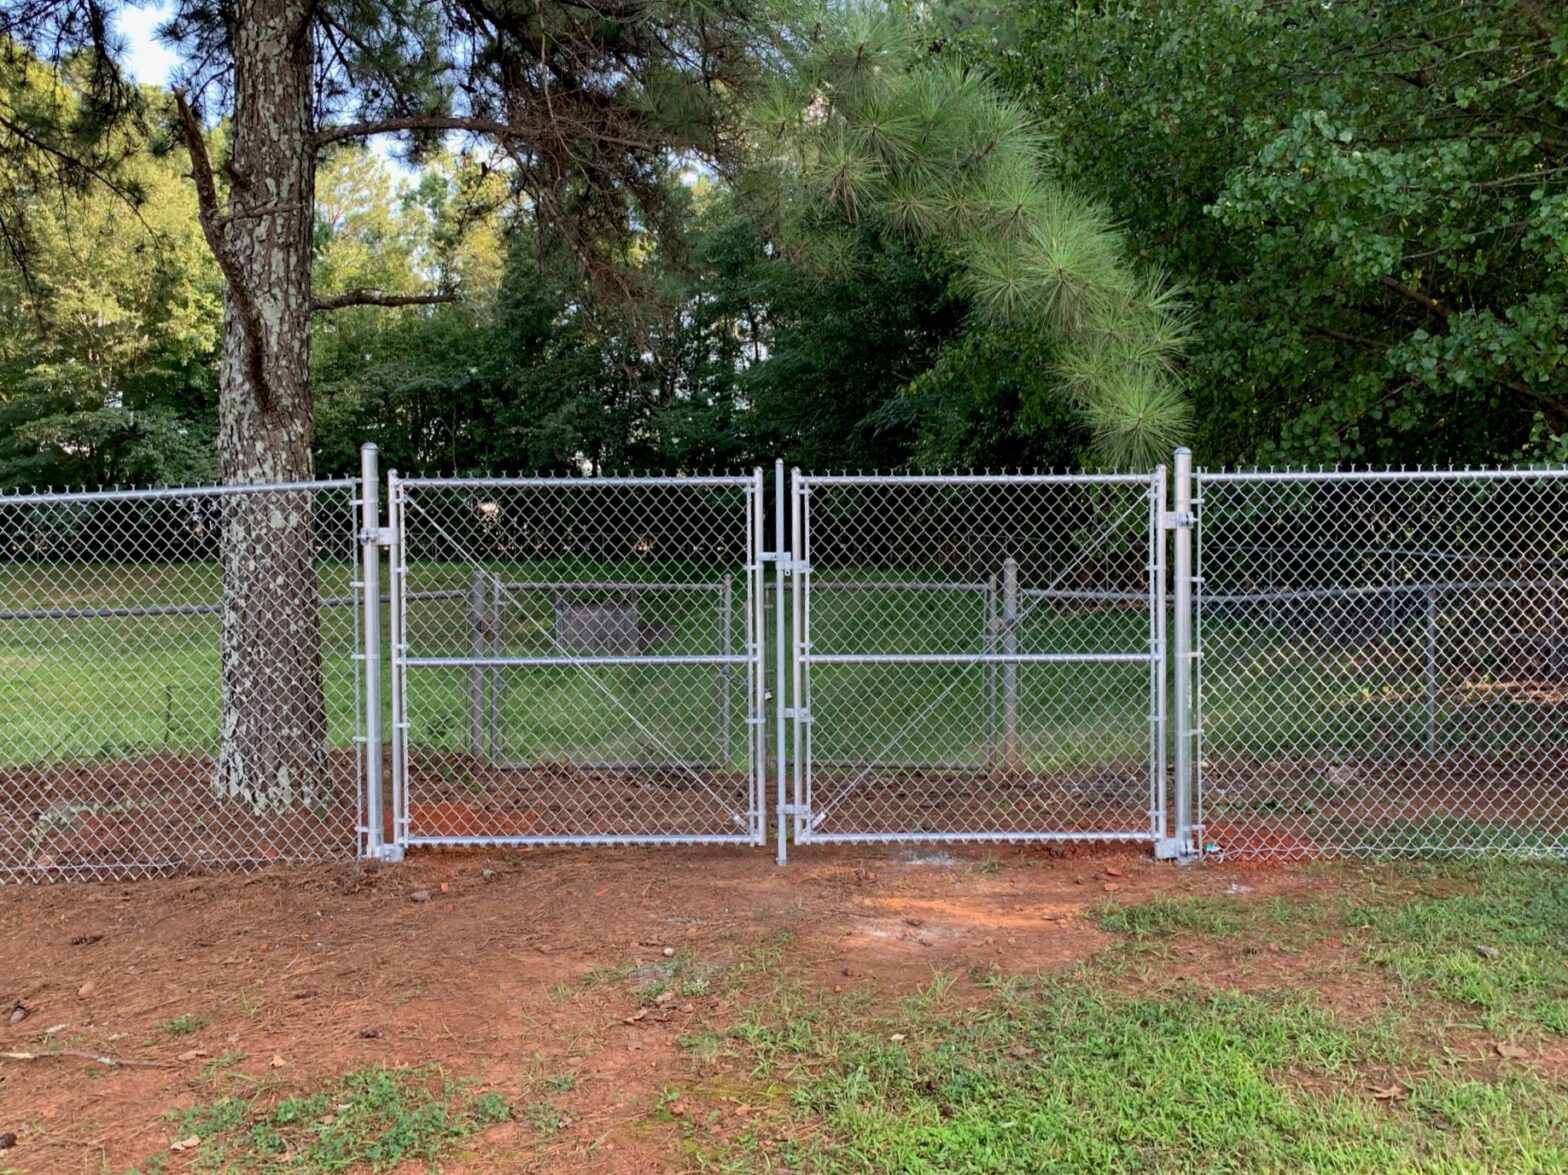 Photo of chain link fence in Norcross, GA